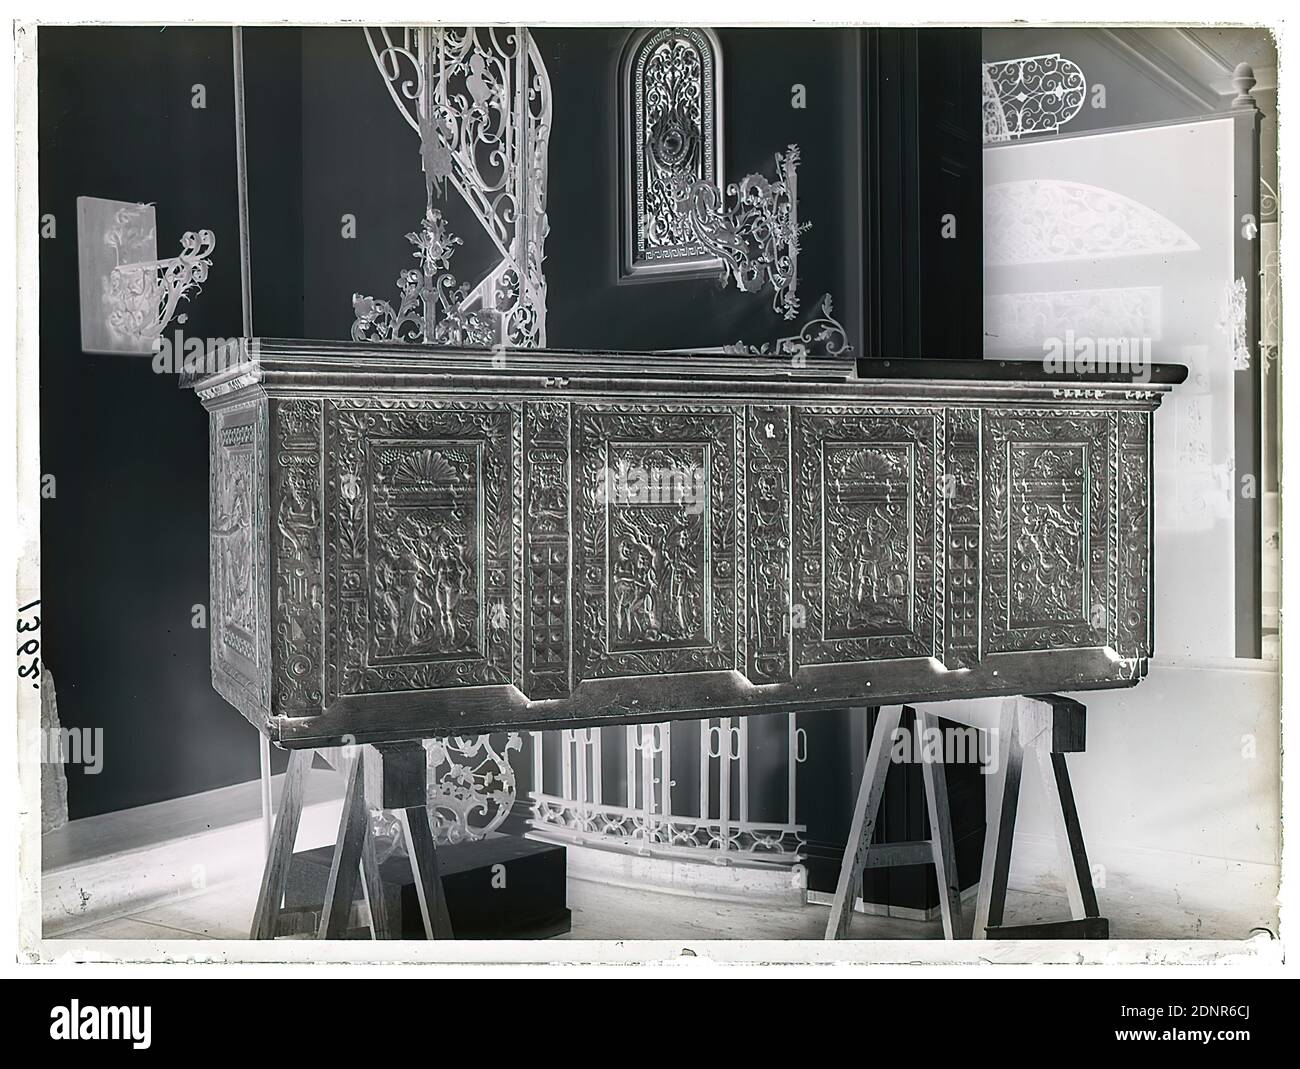 Wilhelm Weimar, chest, glass negative, black and white negative process, total: height: 23.8 cm; width: 17.8 cm, numbered: left: in black ink: 1362, work of applied art (wood, e.g. panelling), ornaments, plant ornaments, chest, box, crate, furniture and household effects, Adam and Eve in Paradise, arts and crafts, industrial design, museum Stock Photo